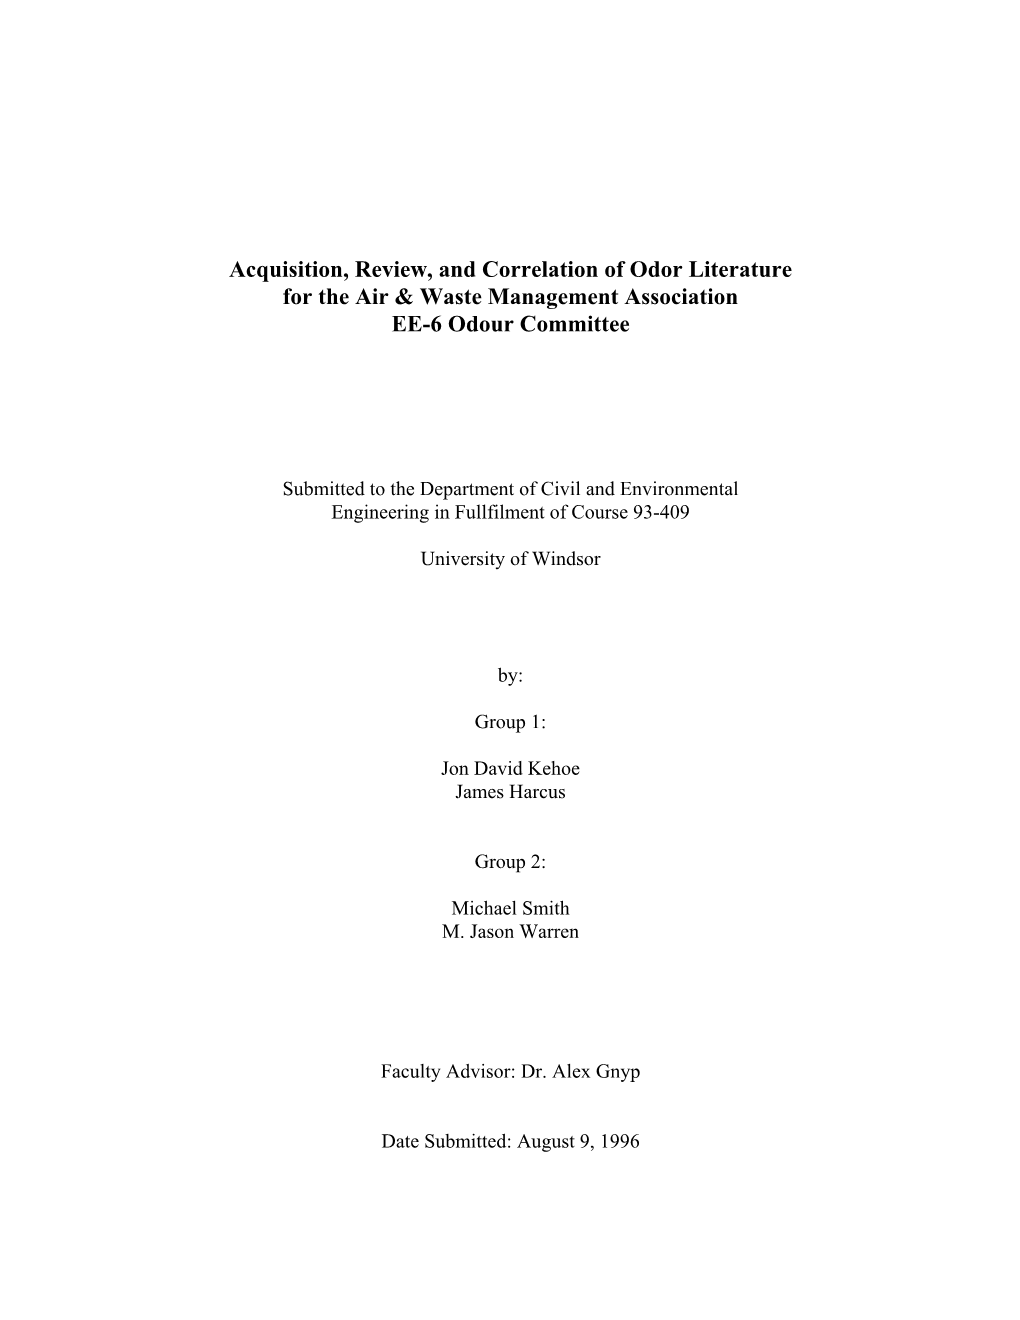 Acquisition, Review, and Correlation of Odor Literature for the Air & Waste Management Association EE-6 Odour Committee